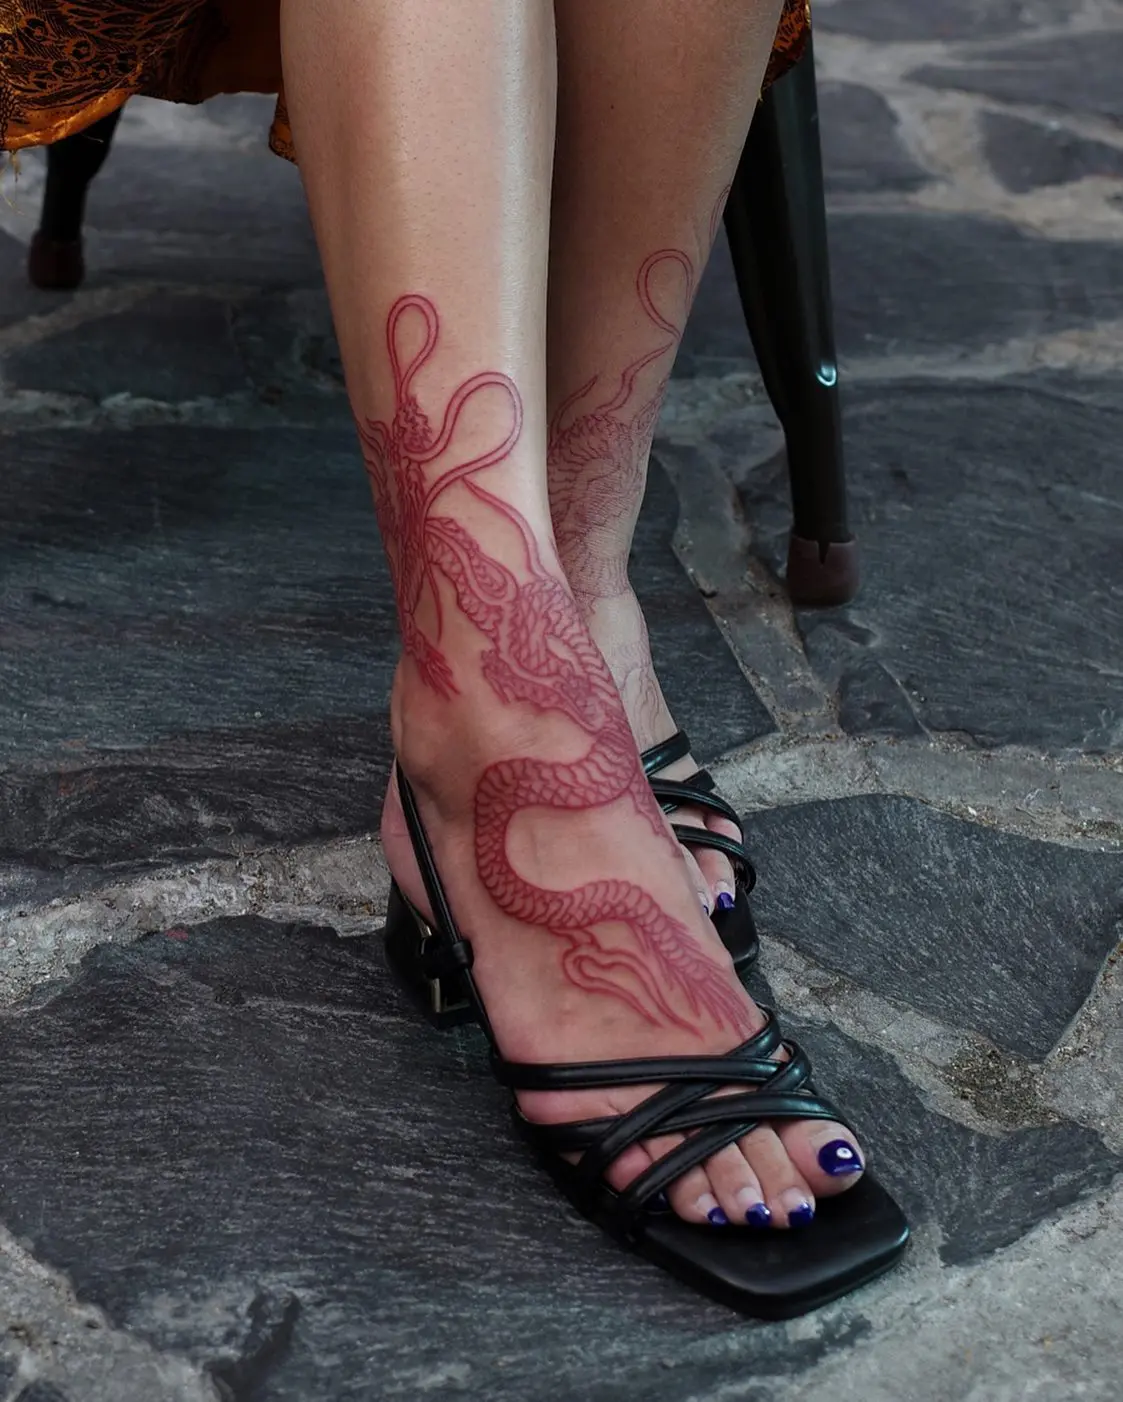 Foot and Ankle Tattoos